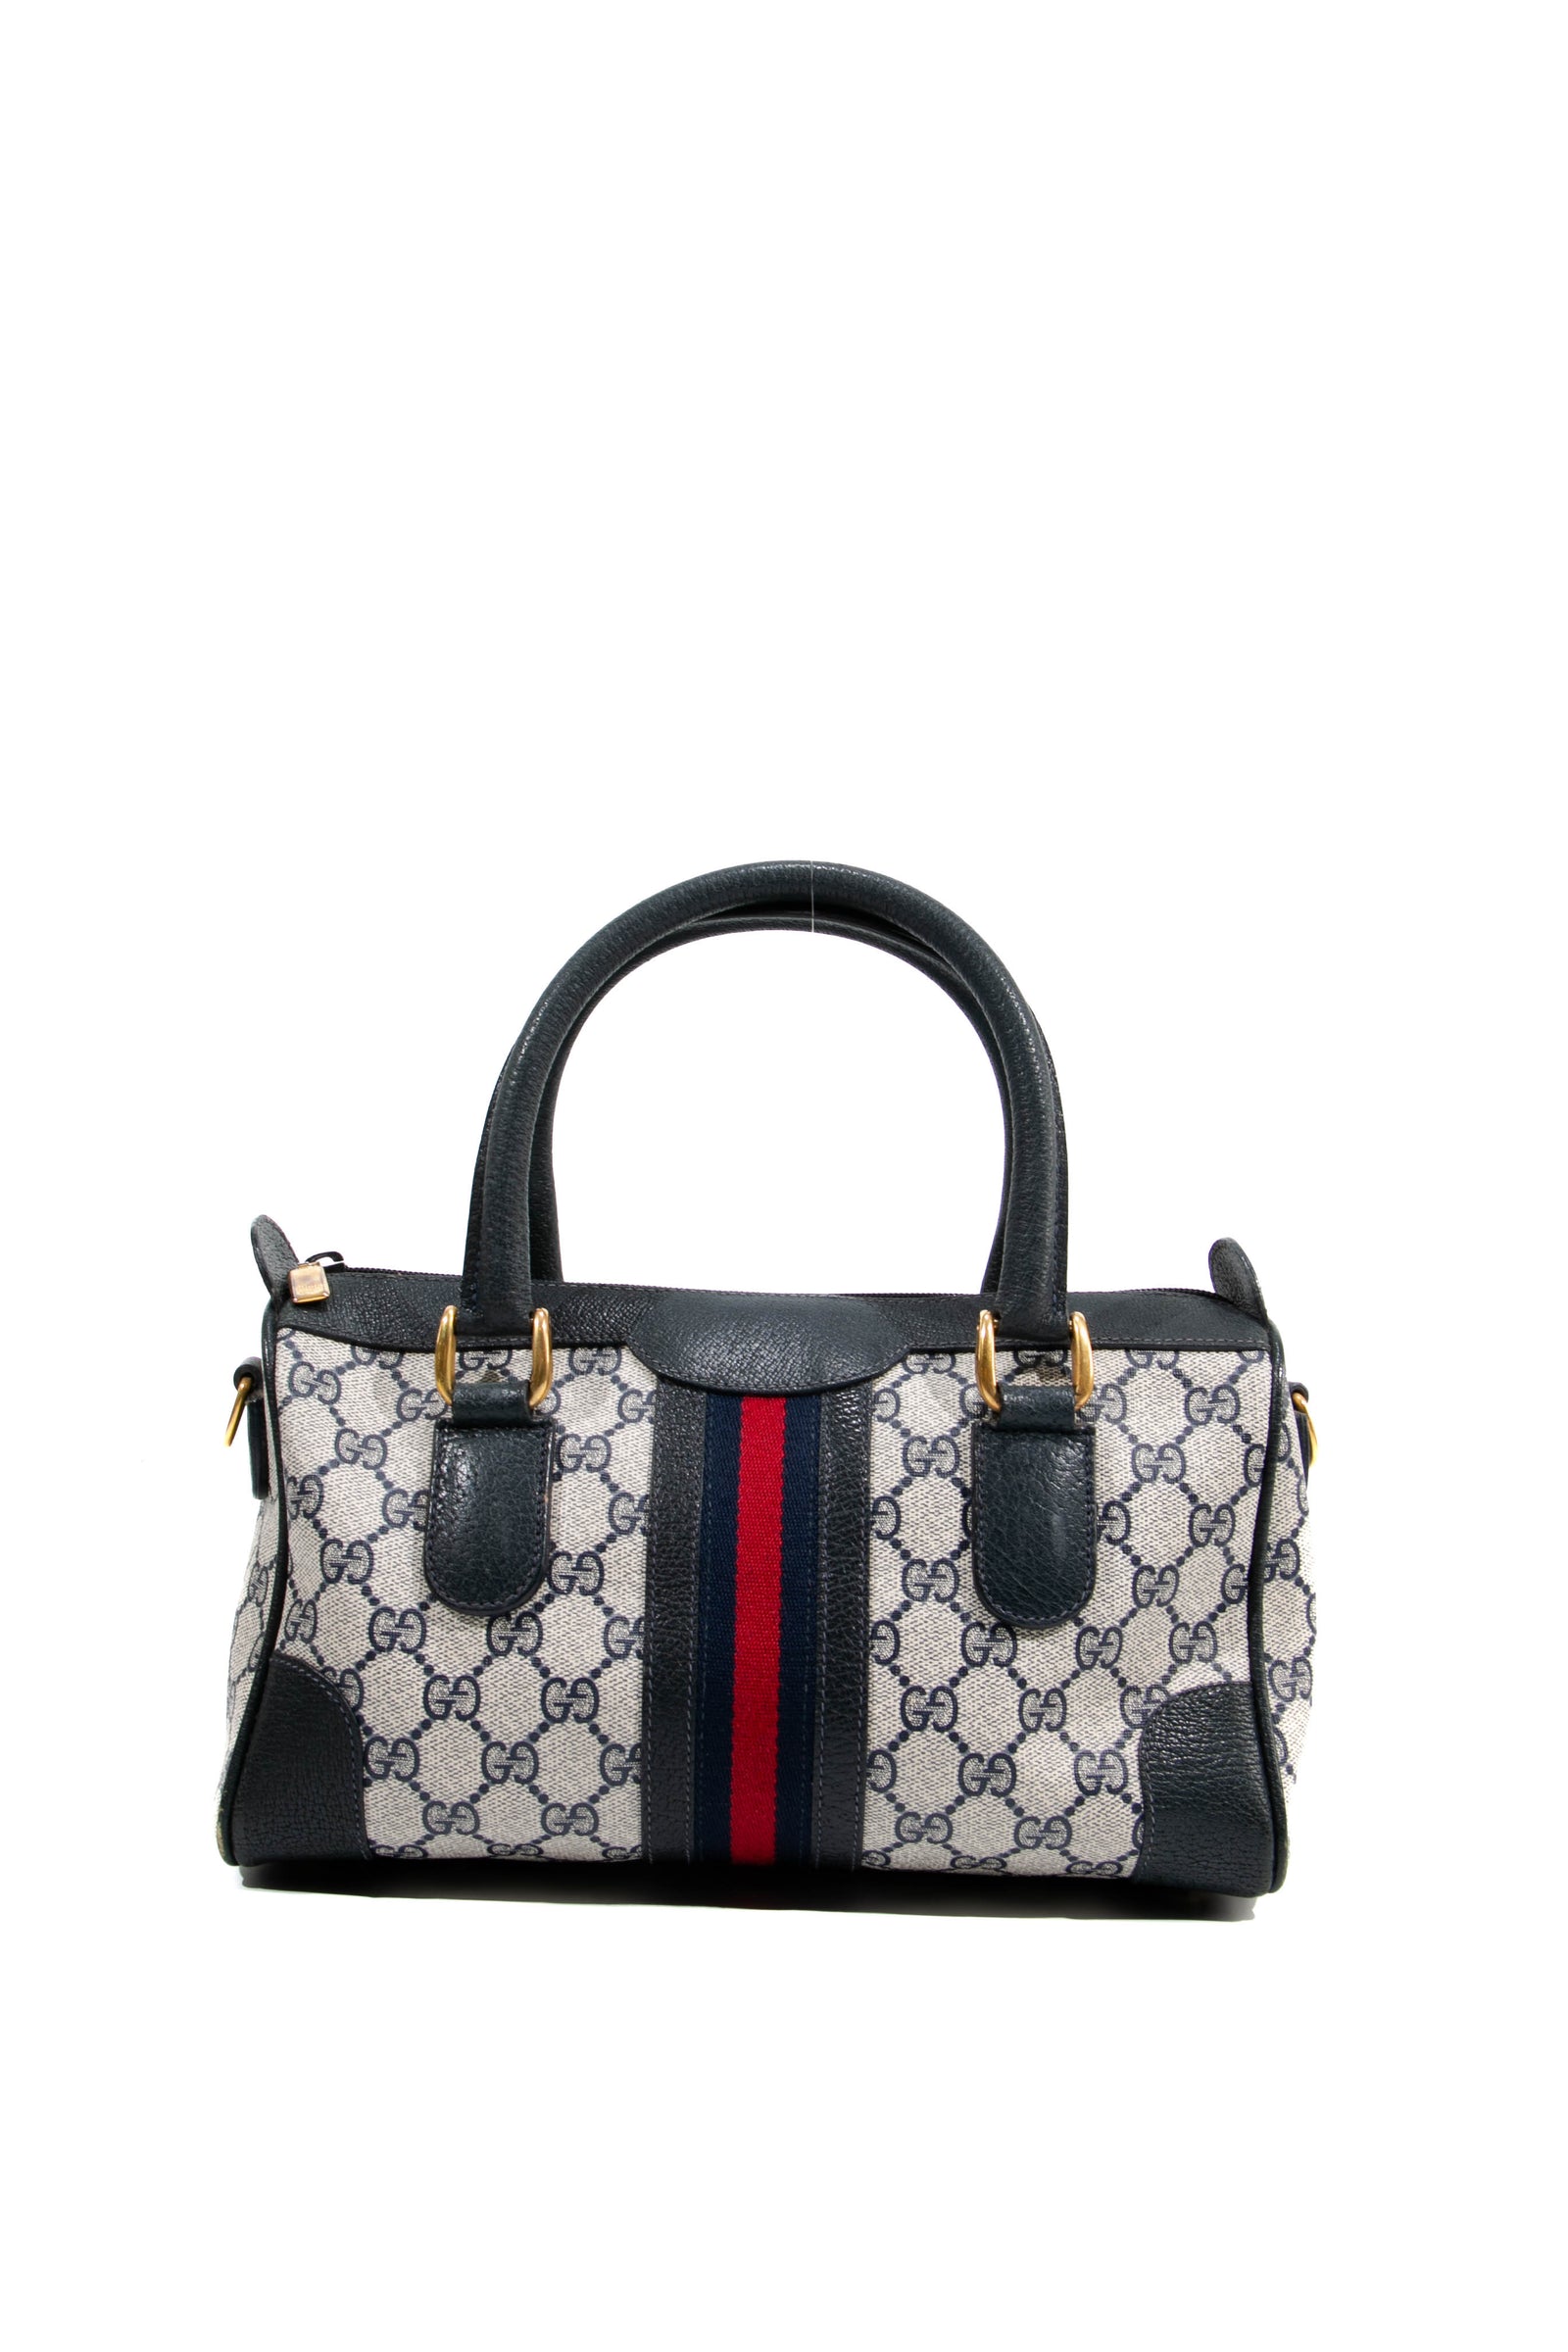 GUCCI Bags for Women